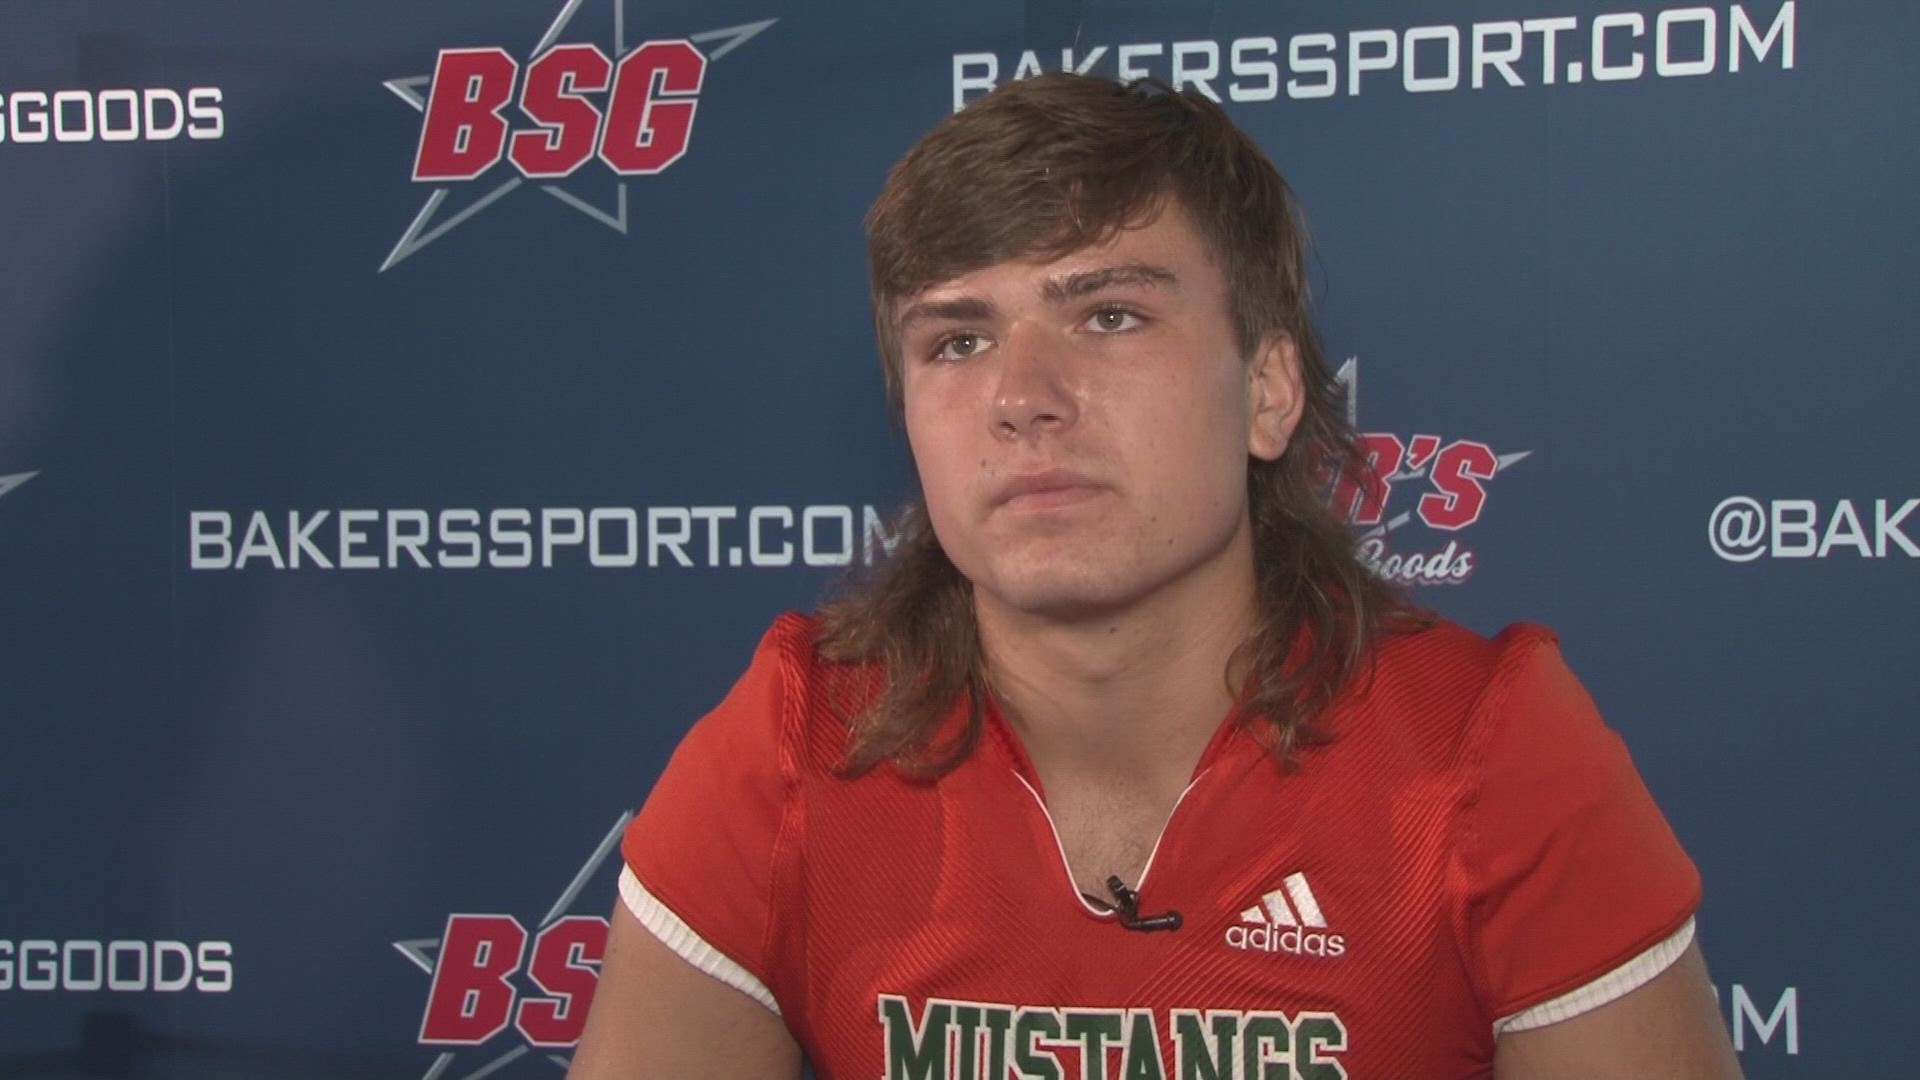 The Mullet? Or the flow? We asked student-athletes at High School Football Media Day who's got the best locks on the First Coast.